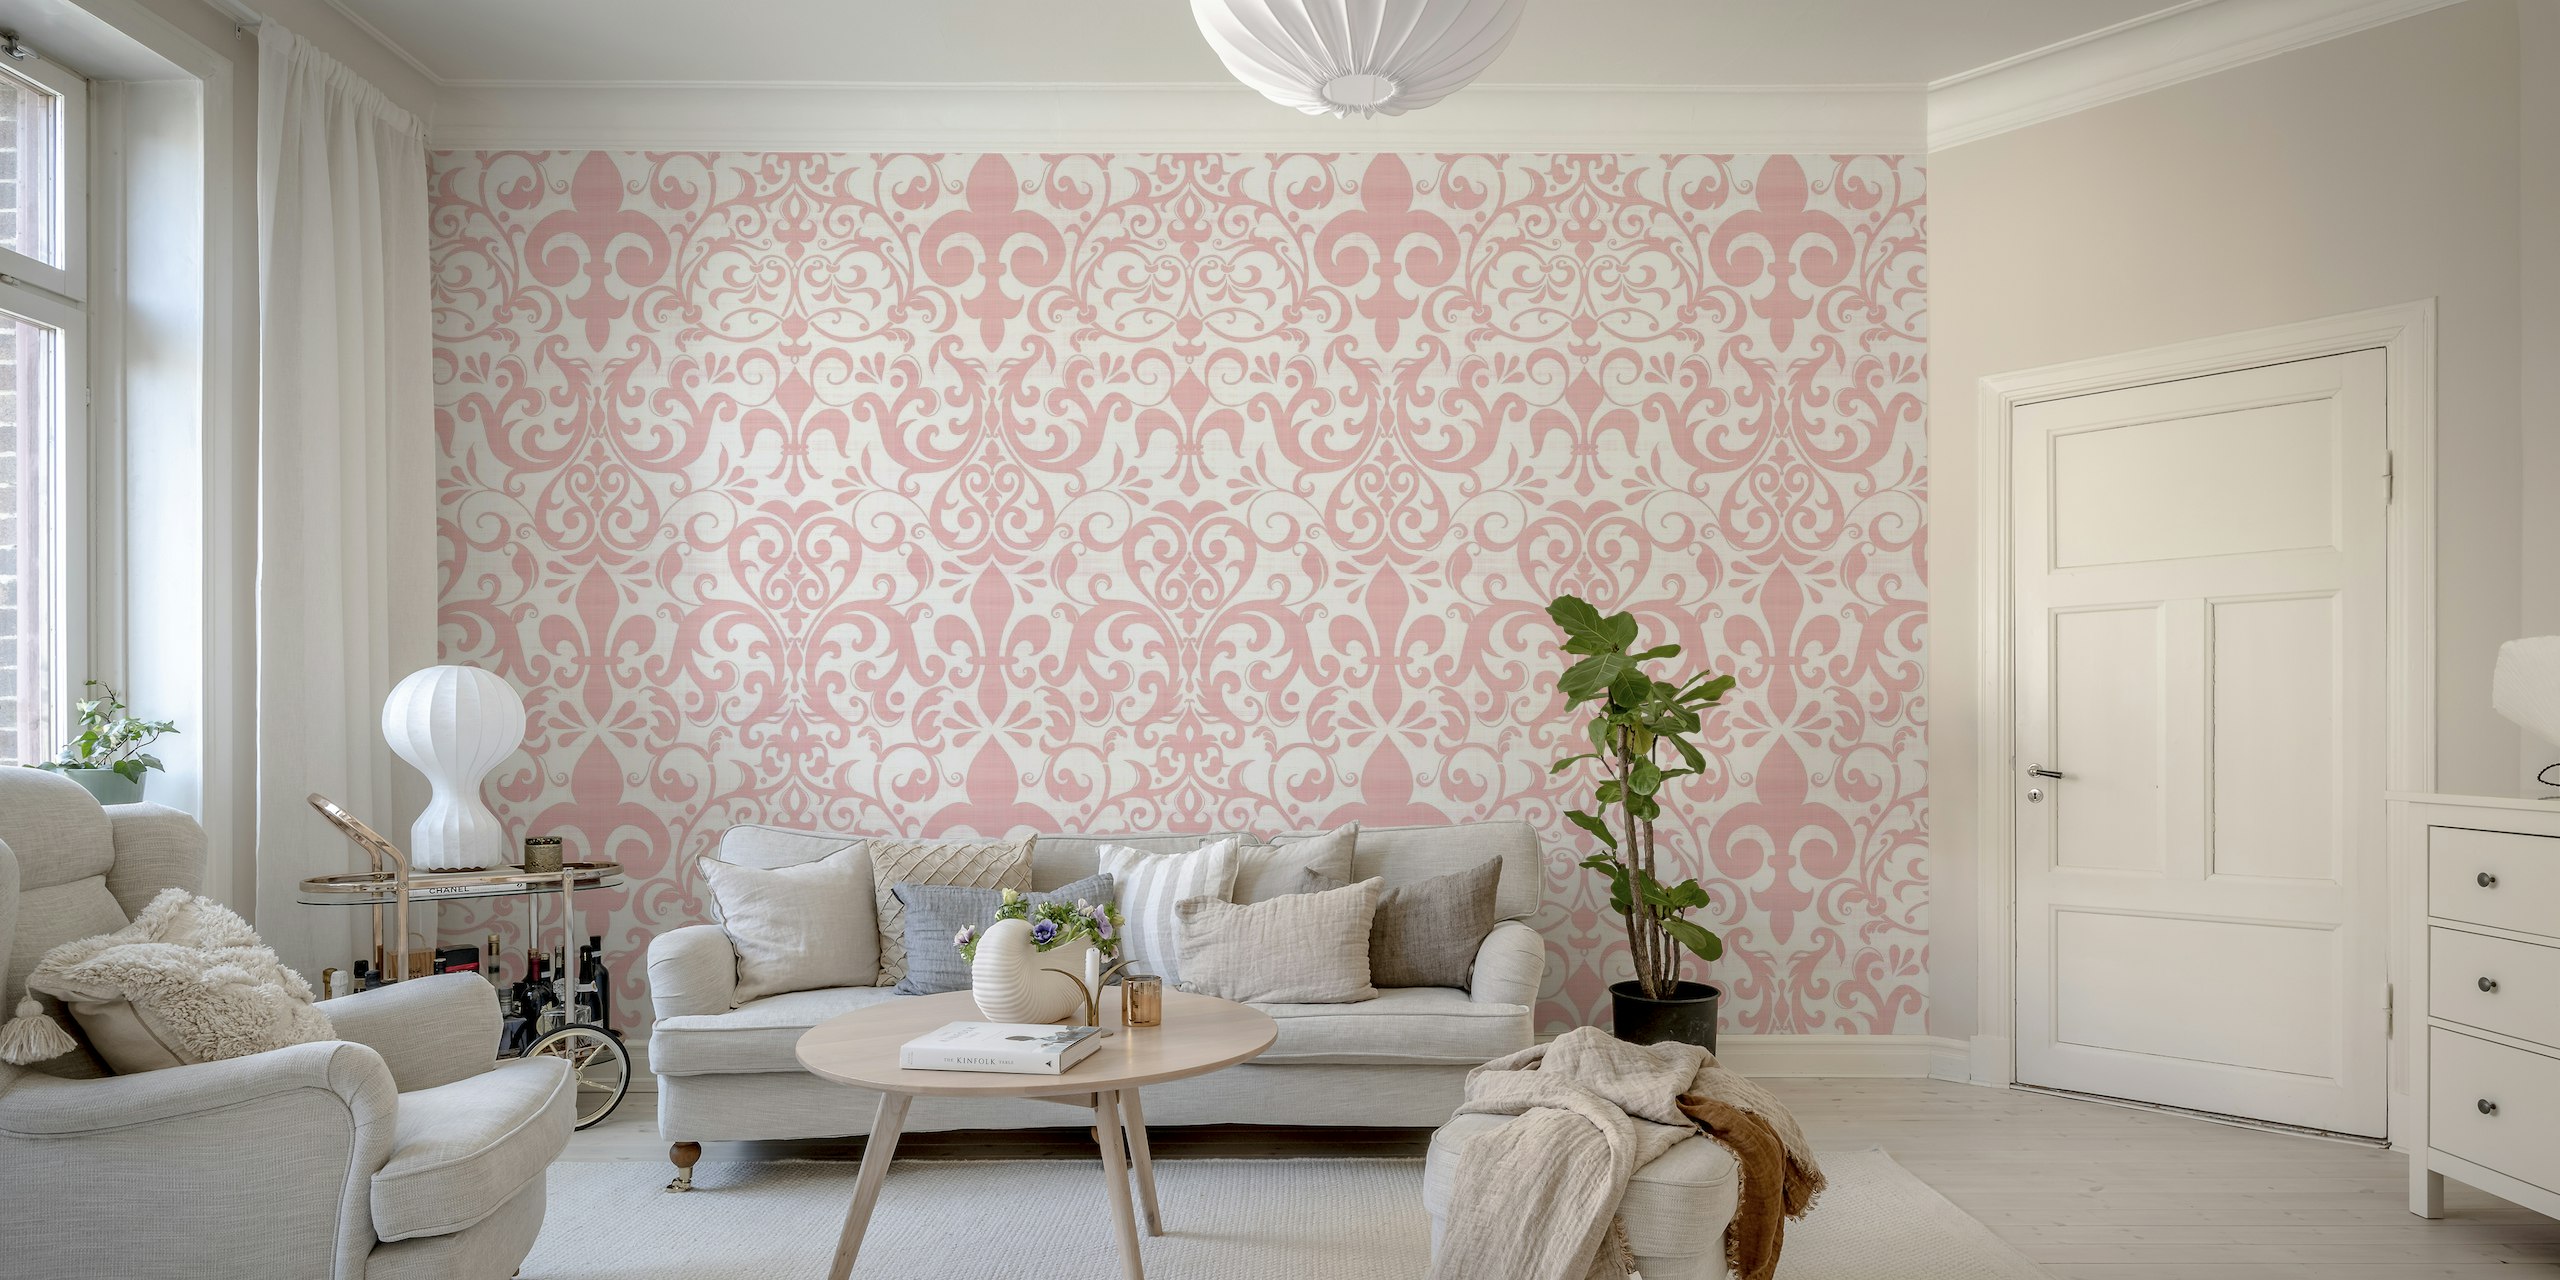 Pastel pink wall mural with a classic fleur de lis and scrollwork pattern for a French linen look.